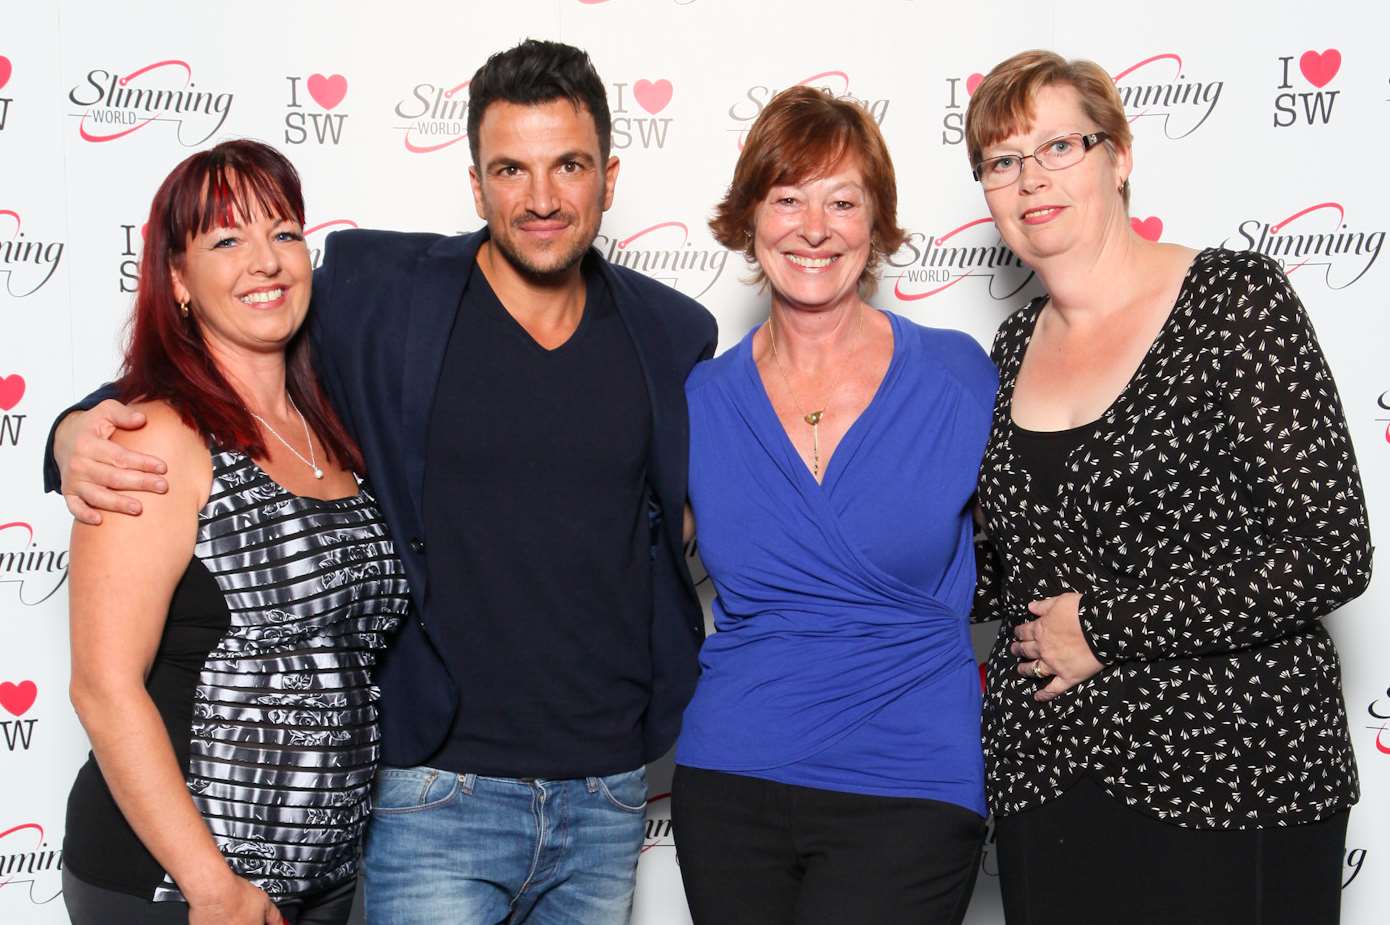 Slimming World Consultants cuddle up to singer and TV presenter Peter Andre (from left to right): Toni Heal, Julie Sinden, Tracey Open